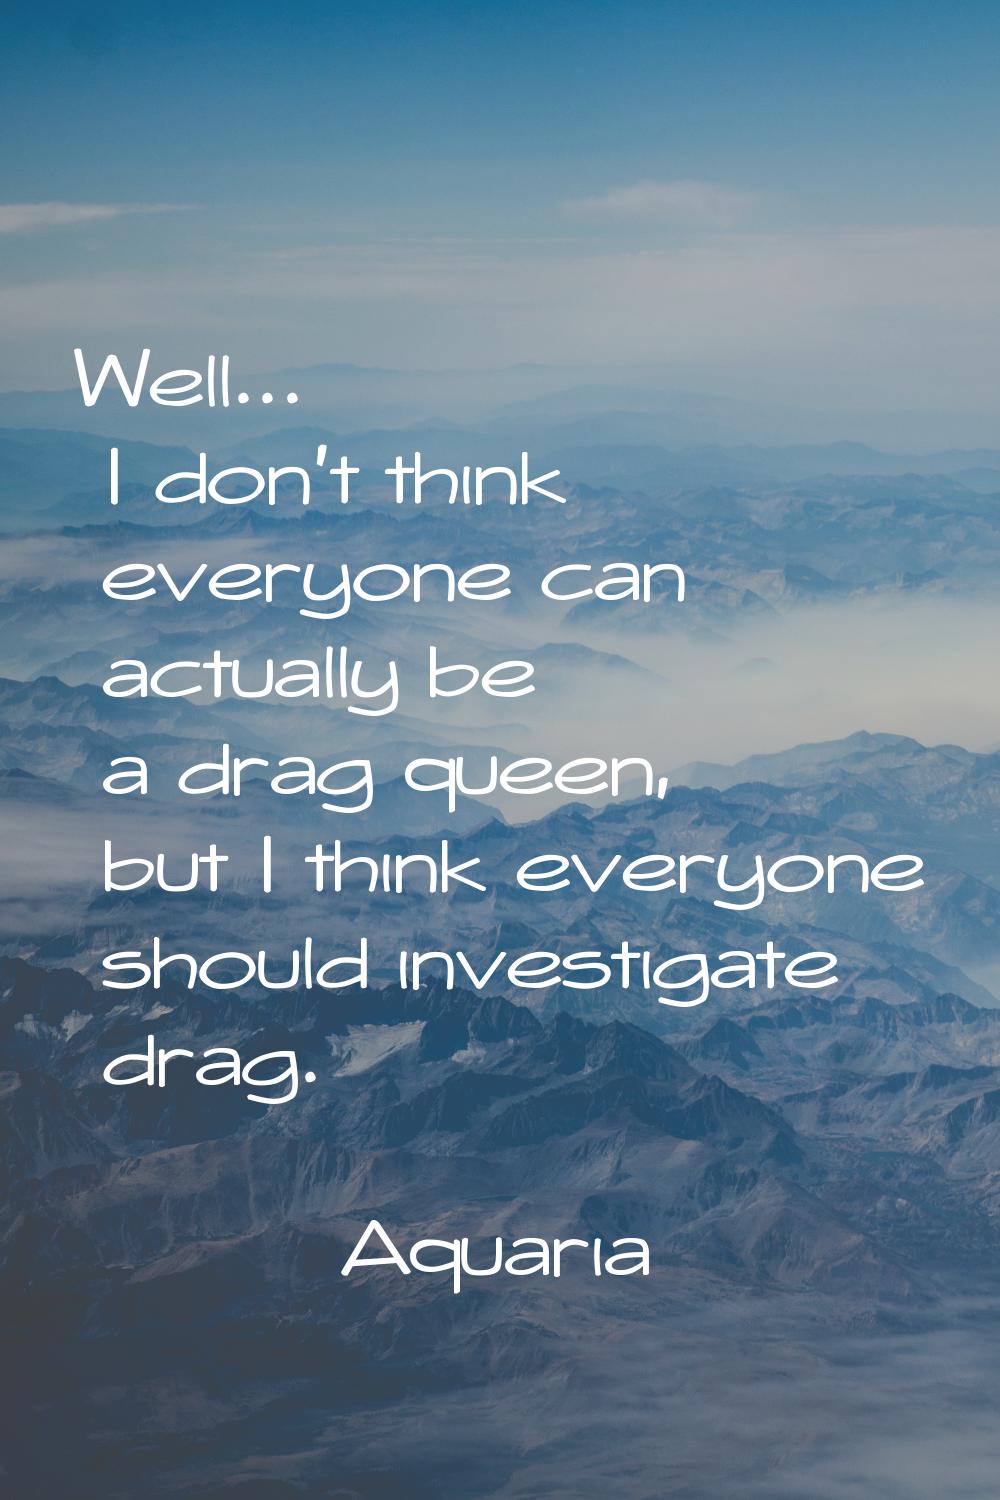 Well... I don't think everyone can actually be a drag queen, but I think everyone should investigat